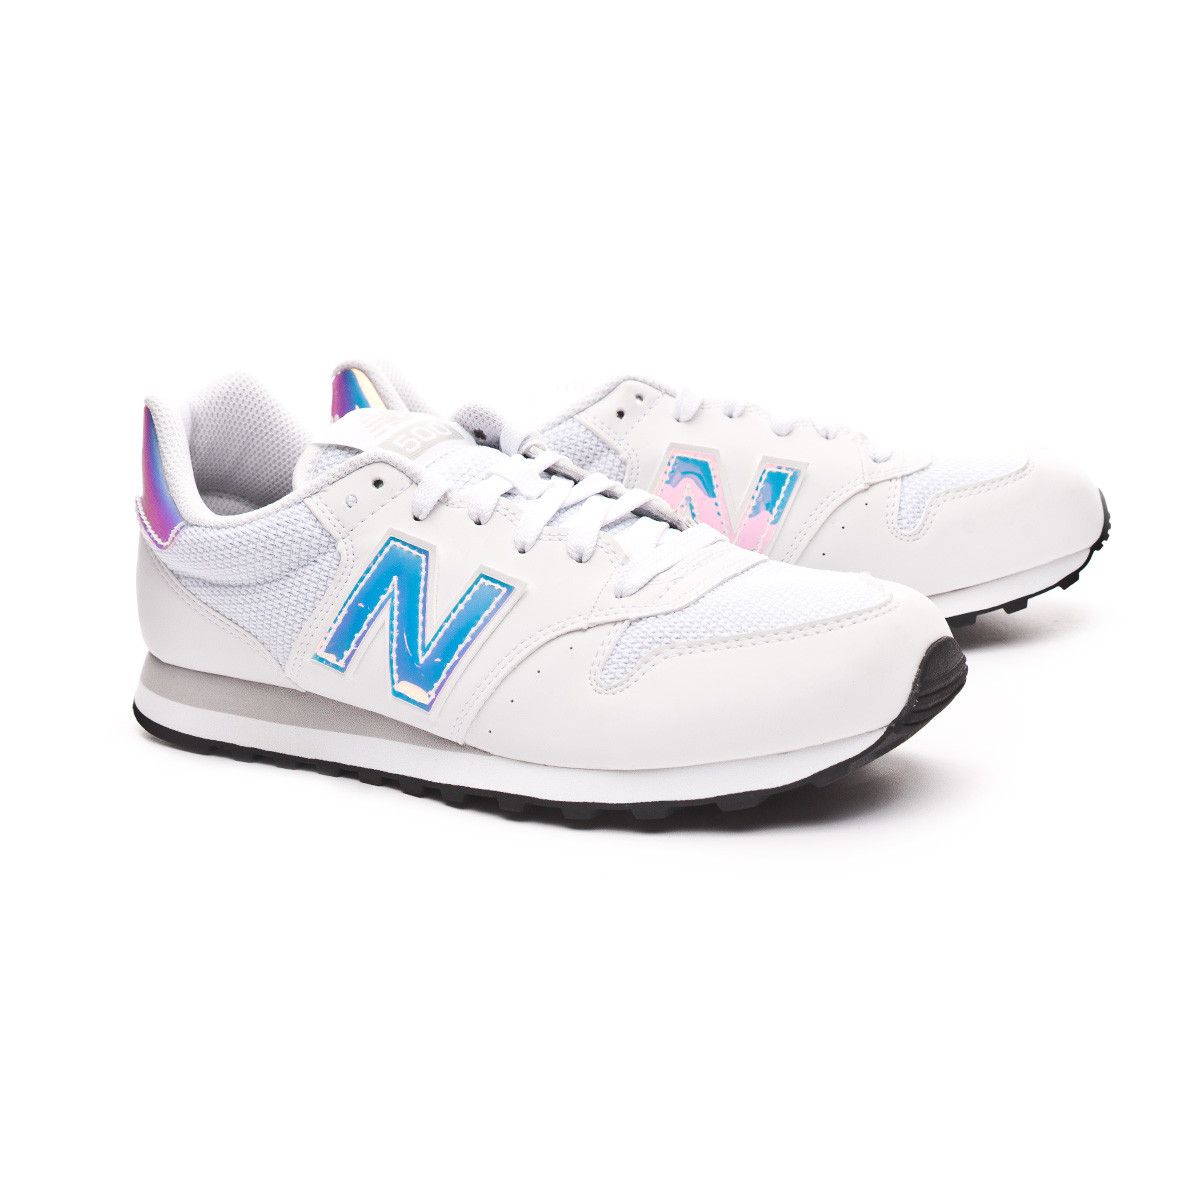 Trainers New Balance 500 v1 Classic White - Football store Fútbol Emotion